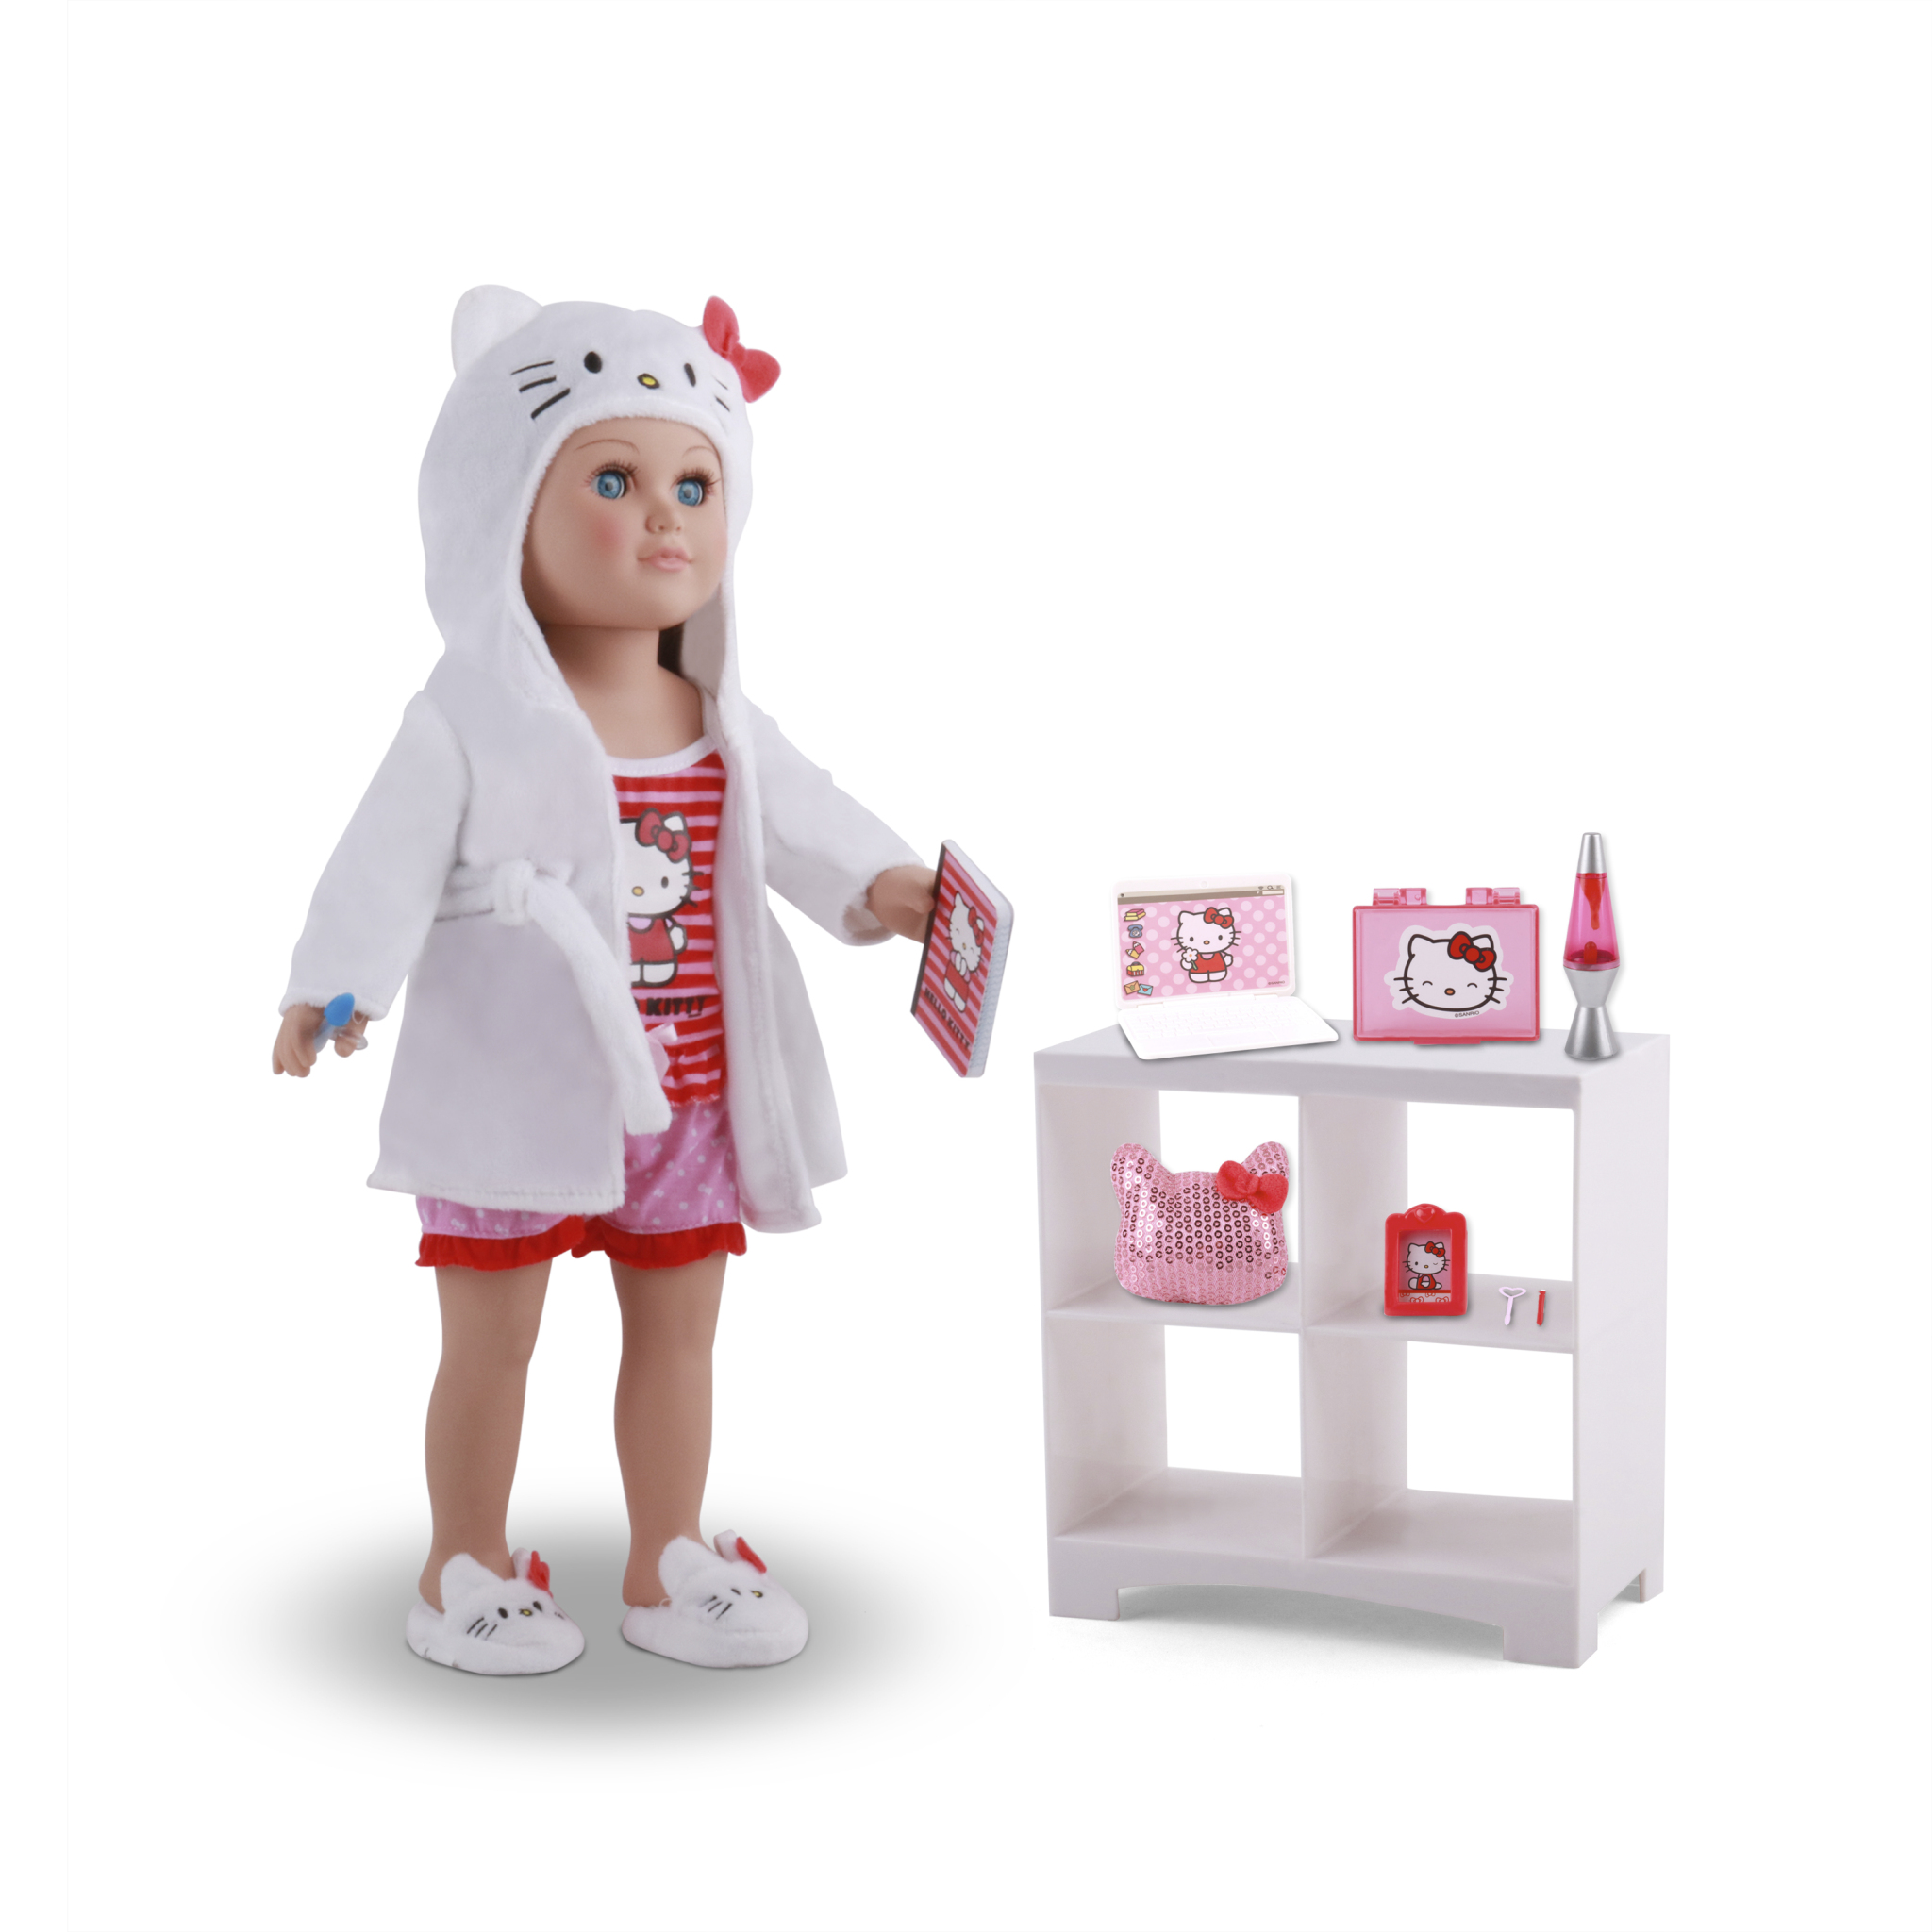 13 pce. My Life As - Hello Kitty Pajama Party Bundle, for 18" Dolls $12.99 at Walmart